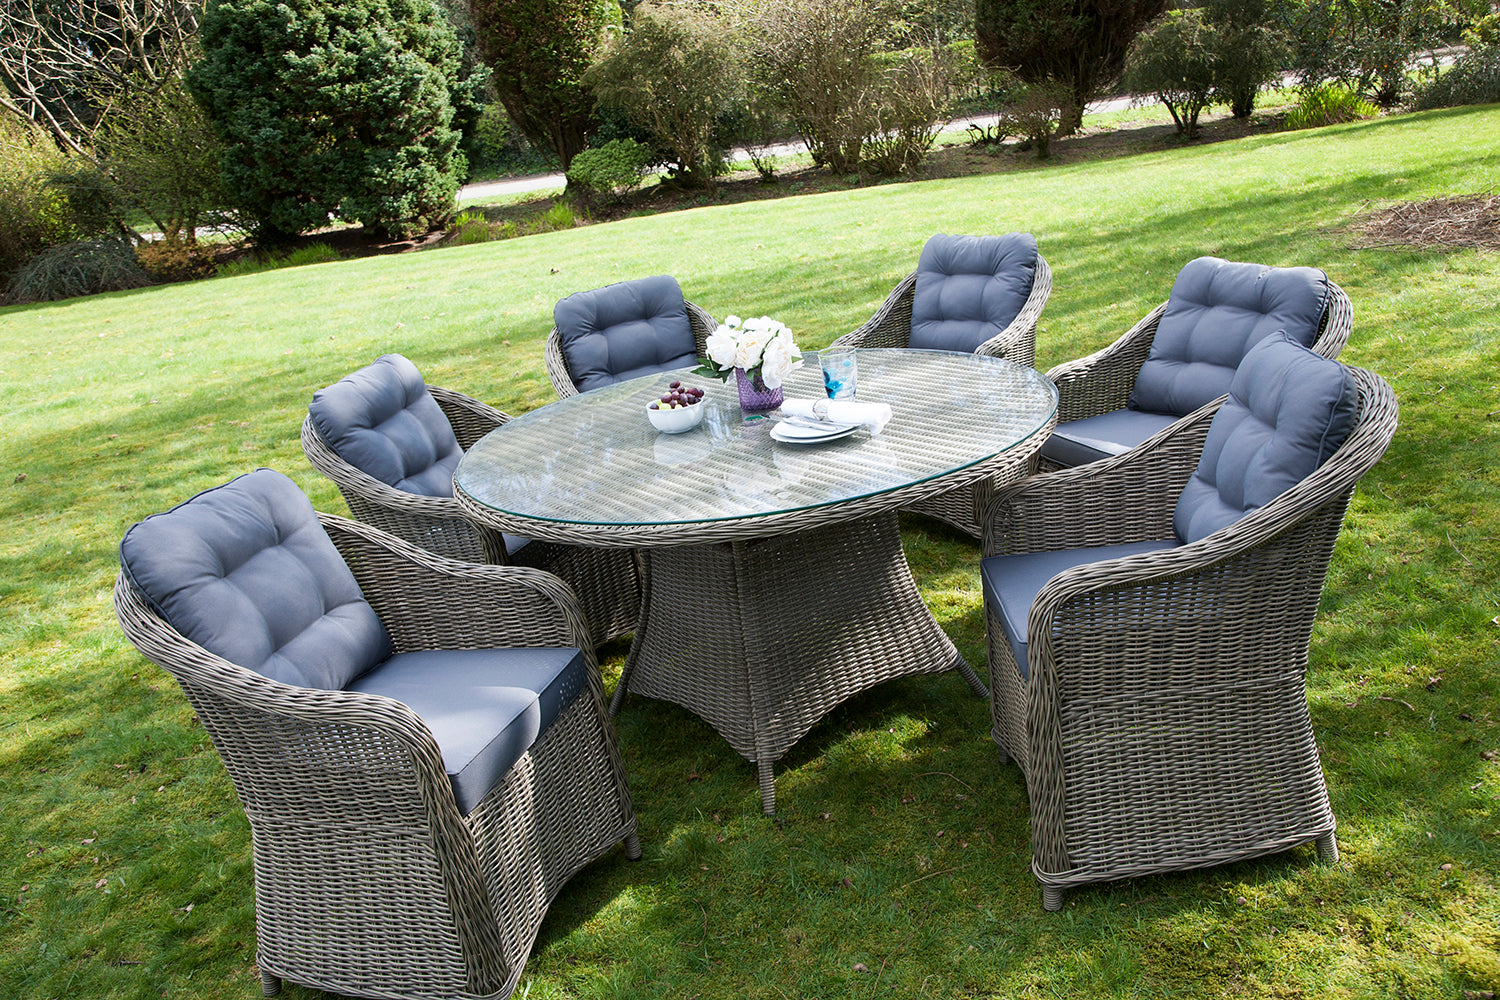 Rattan Garden Furniture available from Top Secret Furniture Outlet, Holmes Chapel, Cheshire CW4 8AF